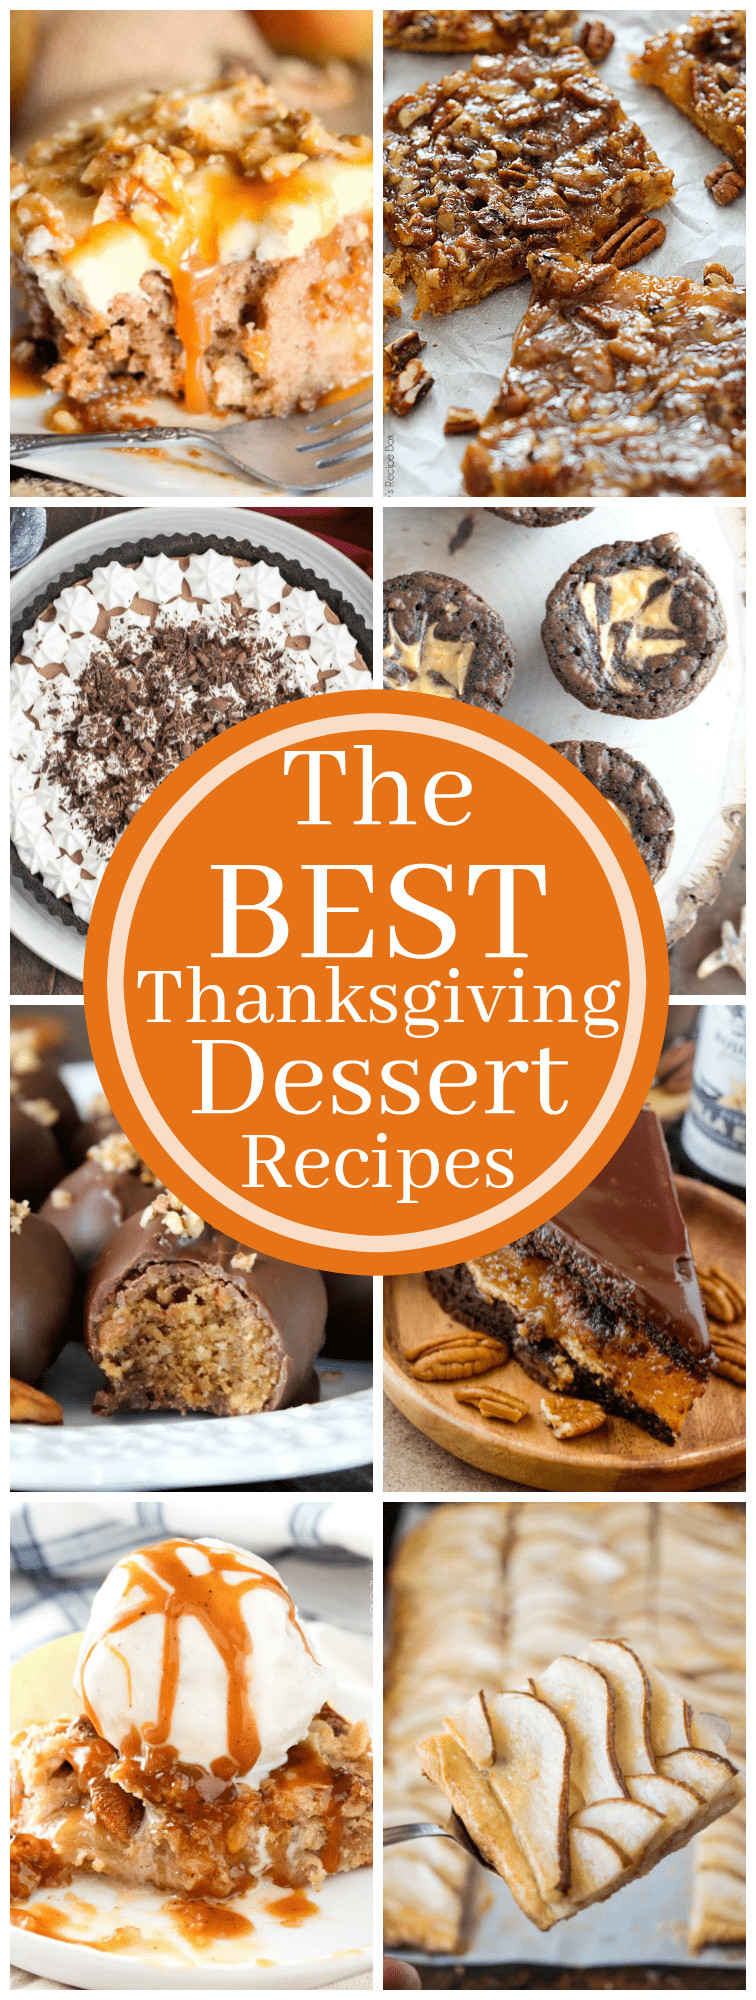 Best Thanksgiving Pie Recipes
 15 of the Best Thanksgiving Desserts Yummy Healthy Easy